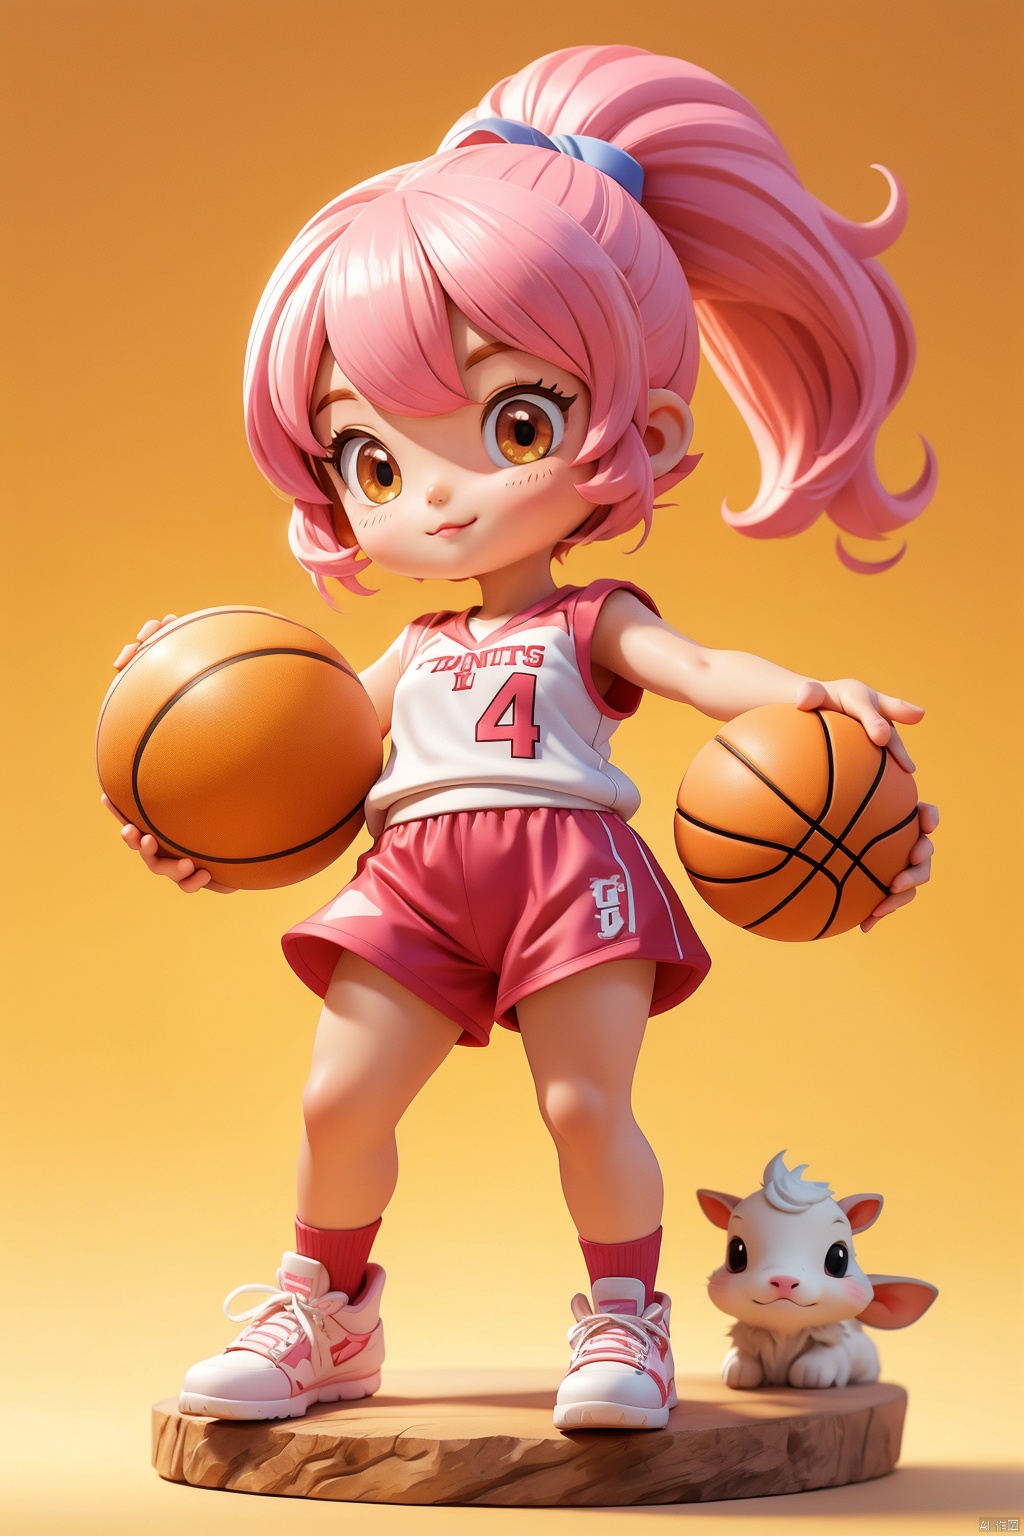 1 little girl, animal IP, solo, (Q version :1.2), determined expression, goat horns, animal nose, blush, basketball uniform, athlete figure, simple white background, pink hair, high ponytail, hands crossed